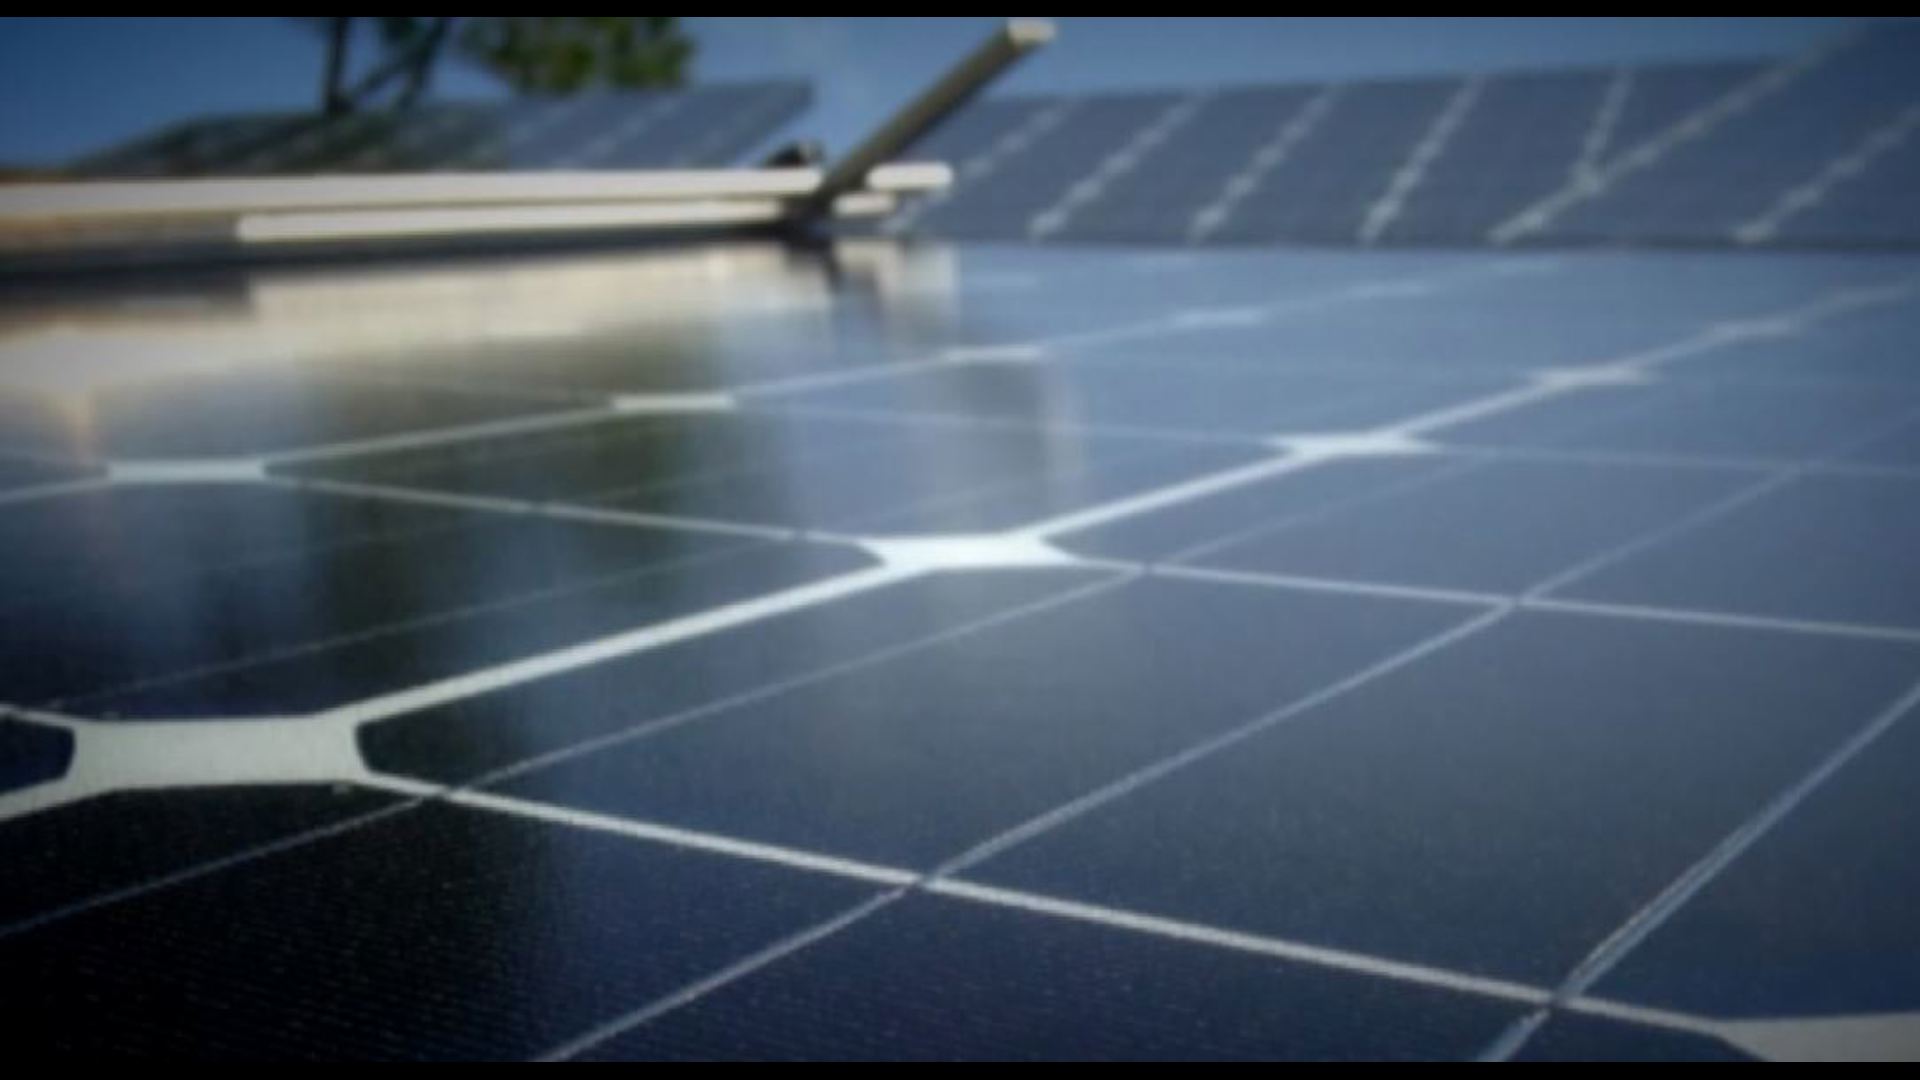 The "Solar for All Program" will disperse funds throughout the state, including in Austin, for new solar panels and battery storage.